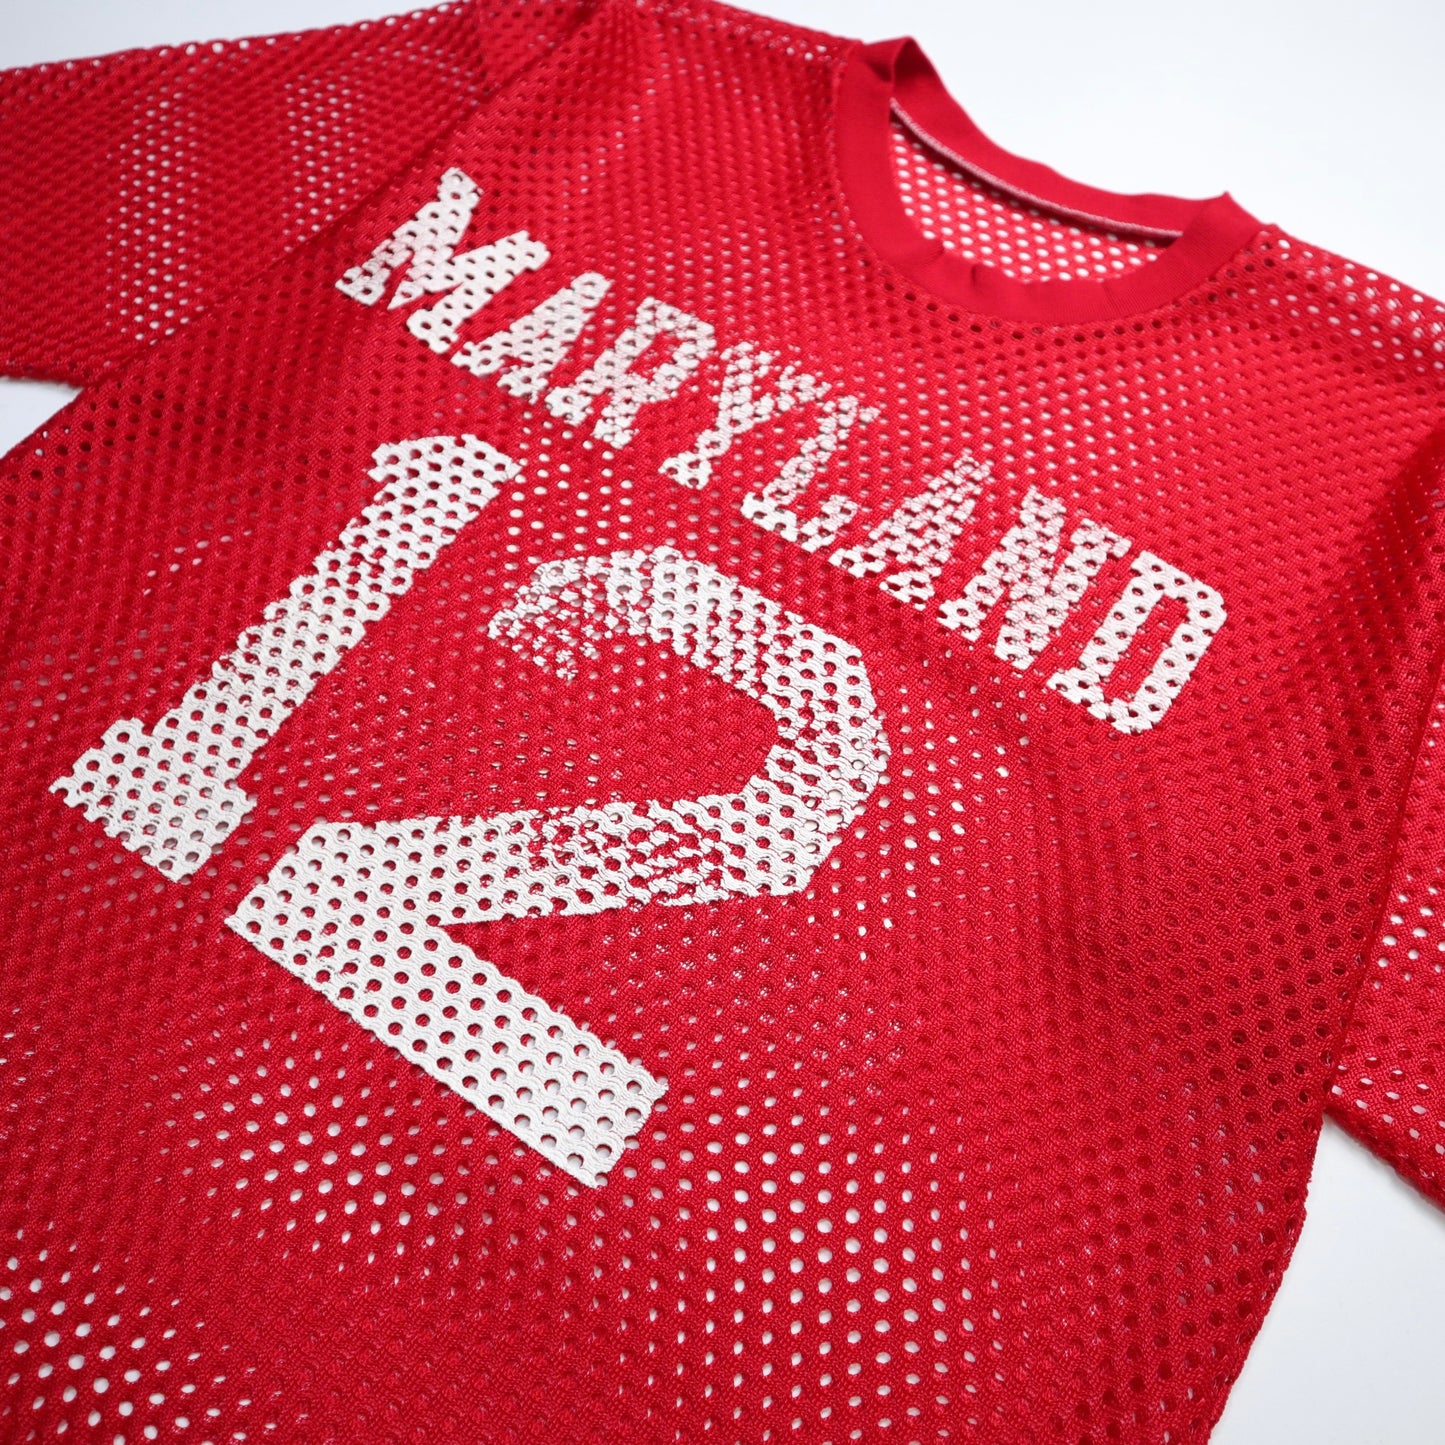 70-80s Champion American-made Maryland red American football net jersey